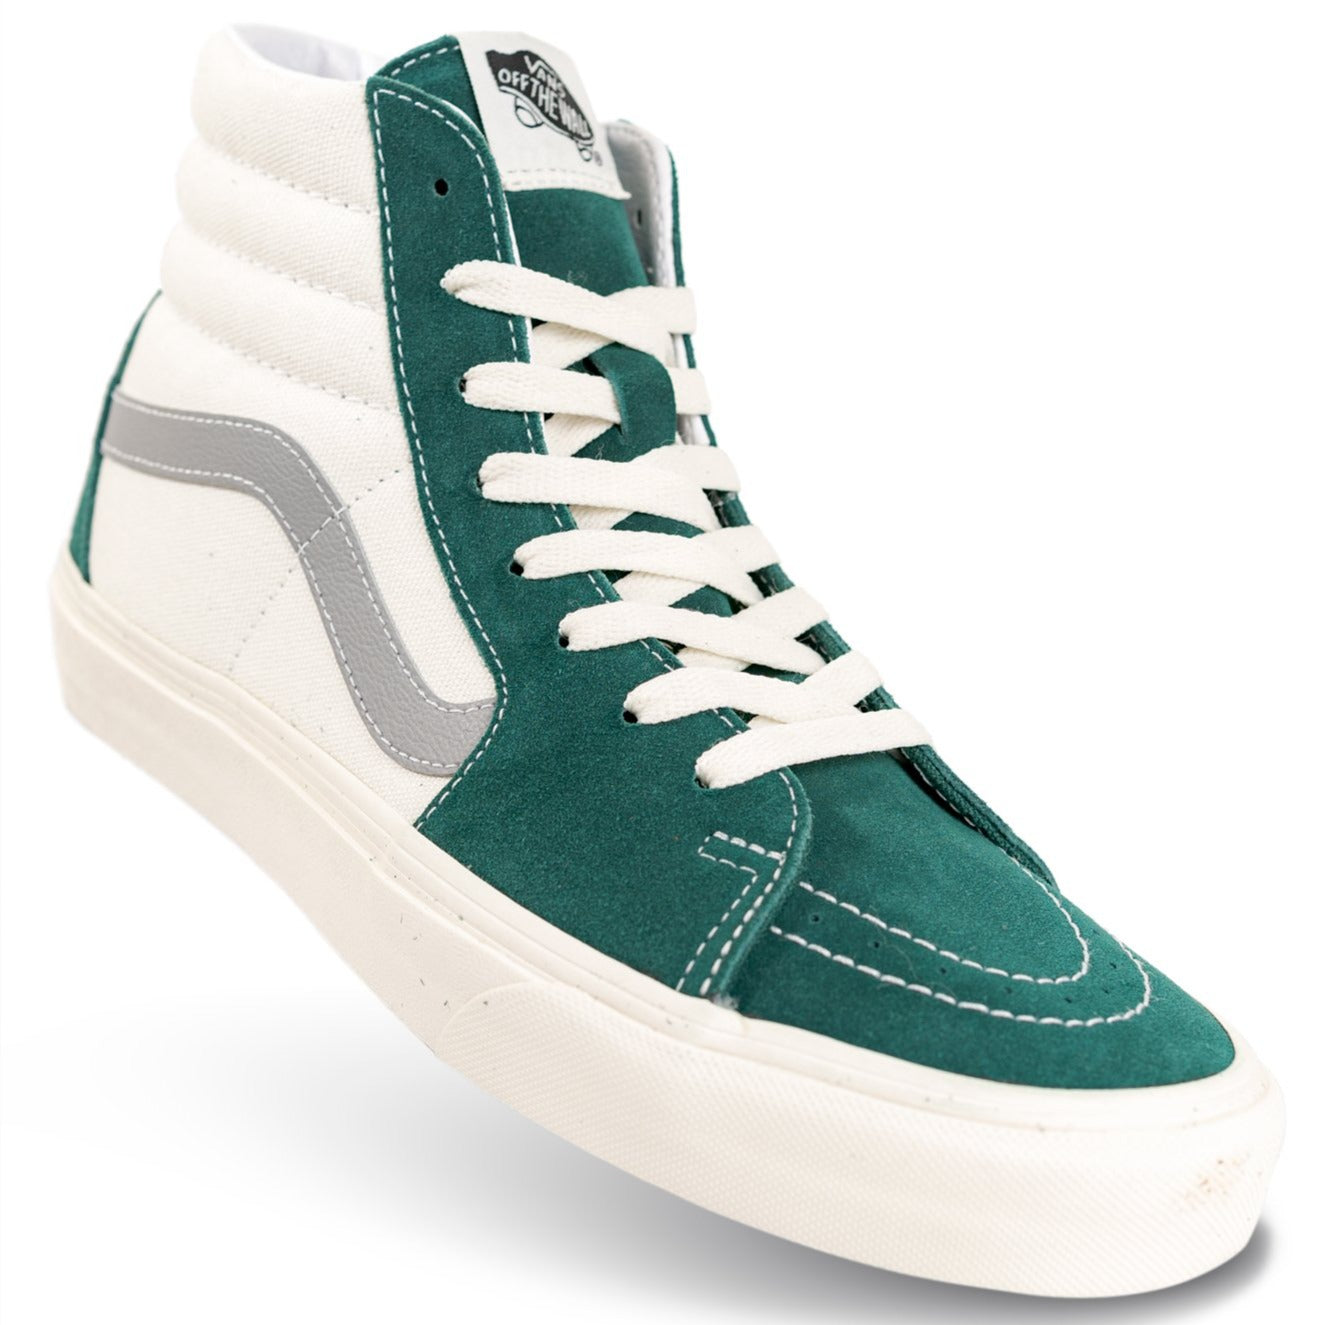 green and white high top vans